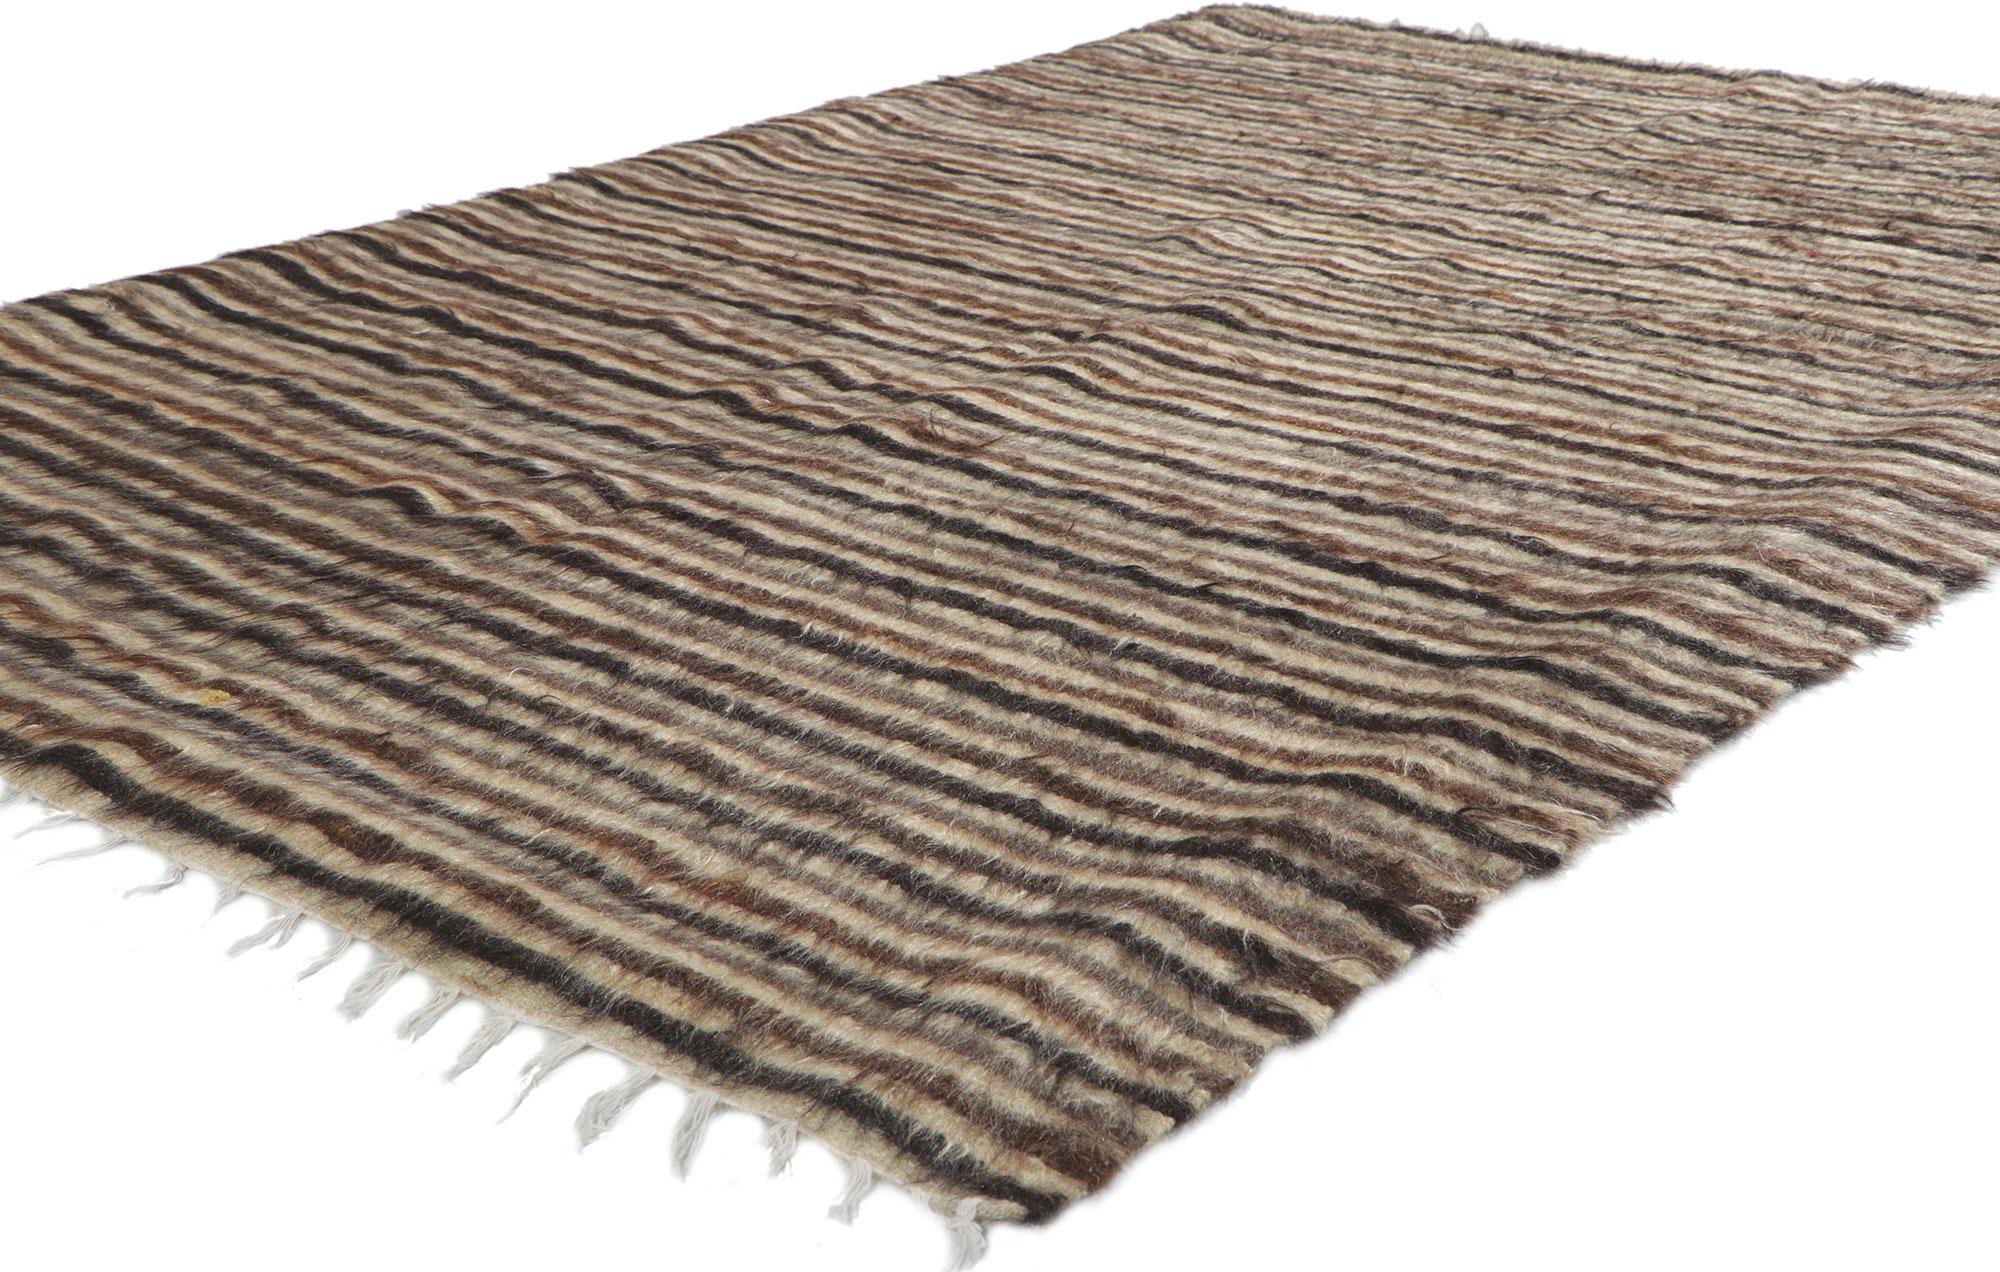 53841 Vintage Turkish Angora Wool Kilim Blanket Rug, 04'04 x 06'04. With its shaggy pile, incredible detail and texture, this handwoven Turkish angora kilim rug is a captivating vision of woven beauty. The eye-catching striped pattern and earthy